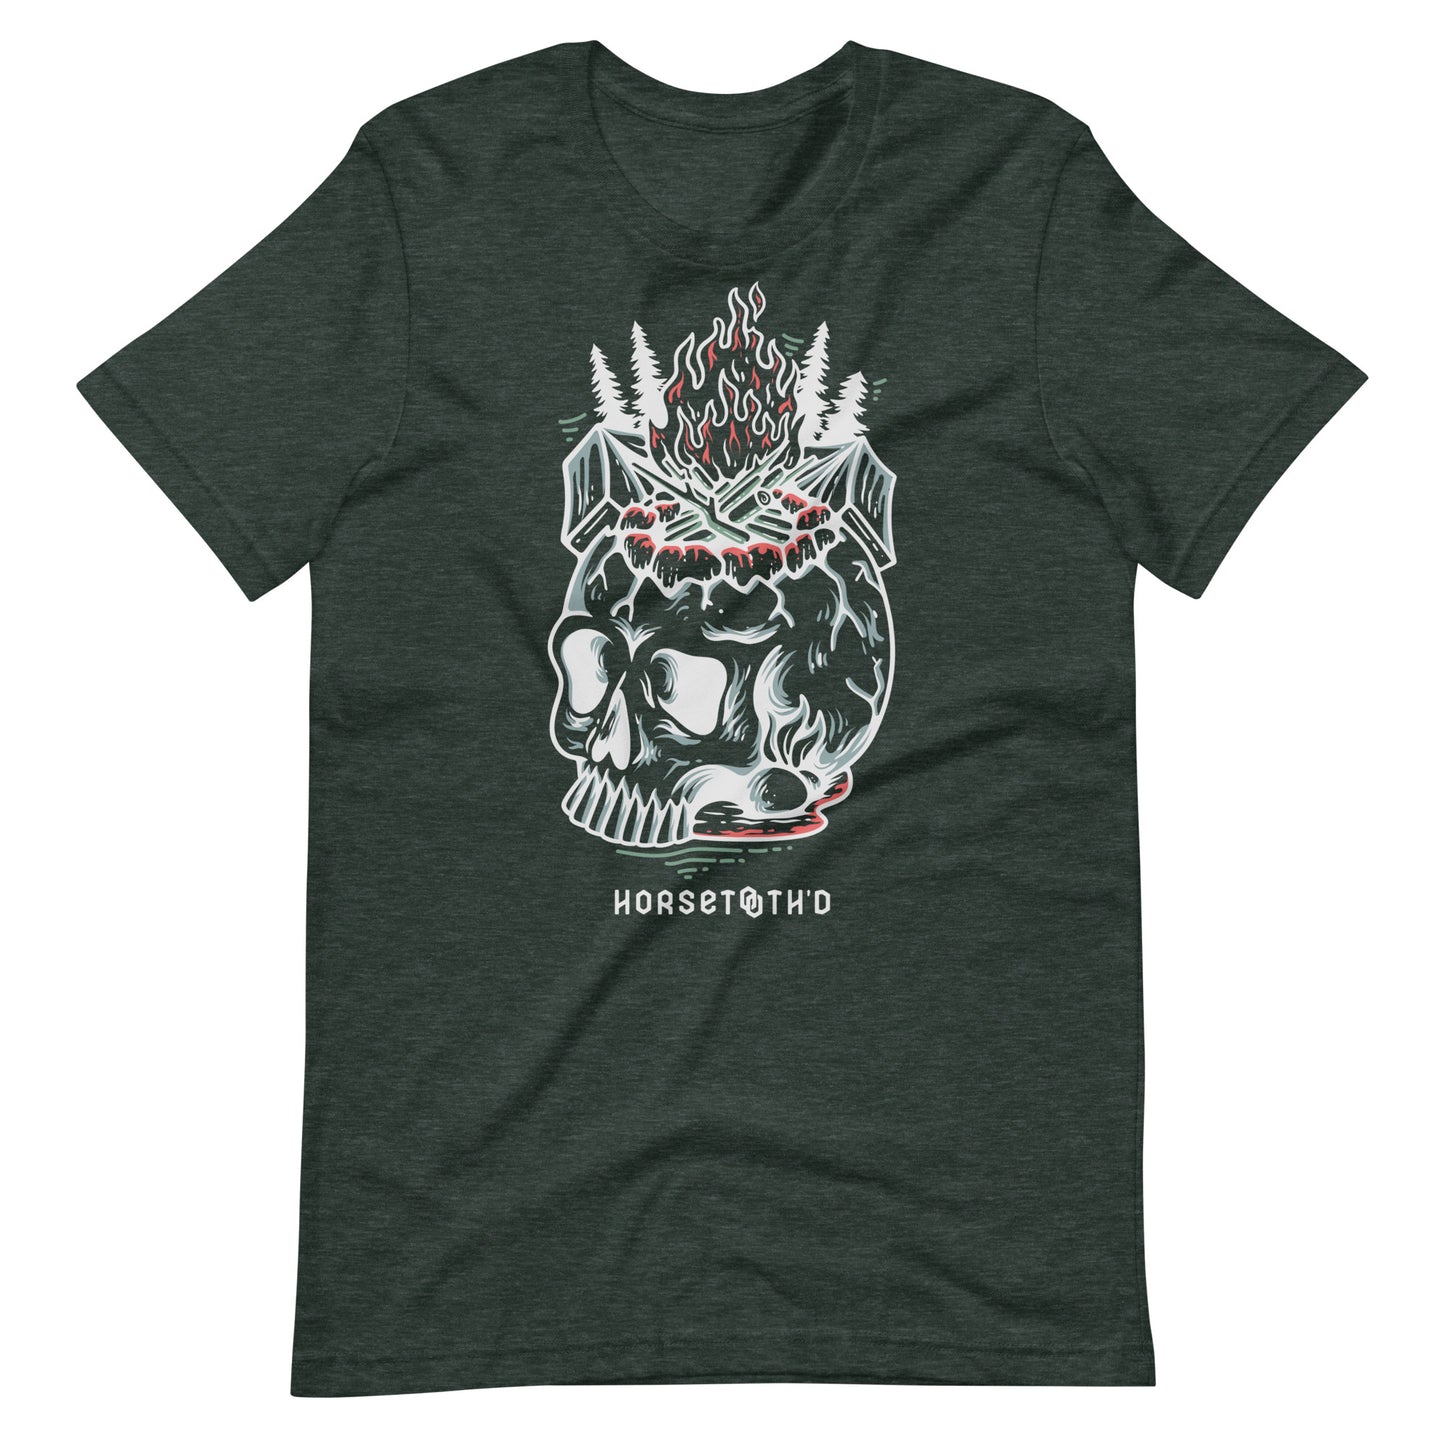 Bella Canvas 3001 t-shirt in Heather color with a bold, fiery skull design